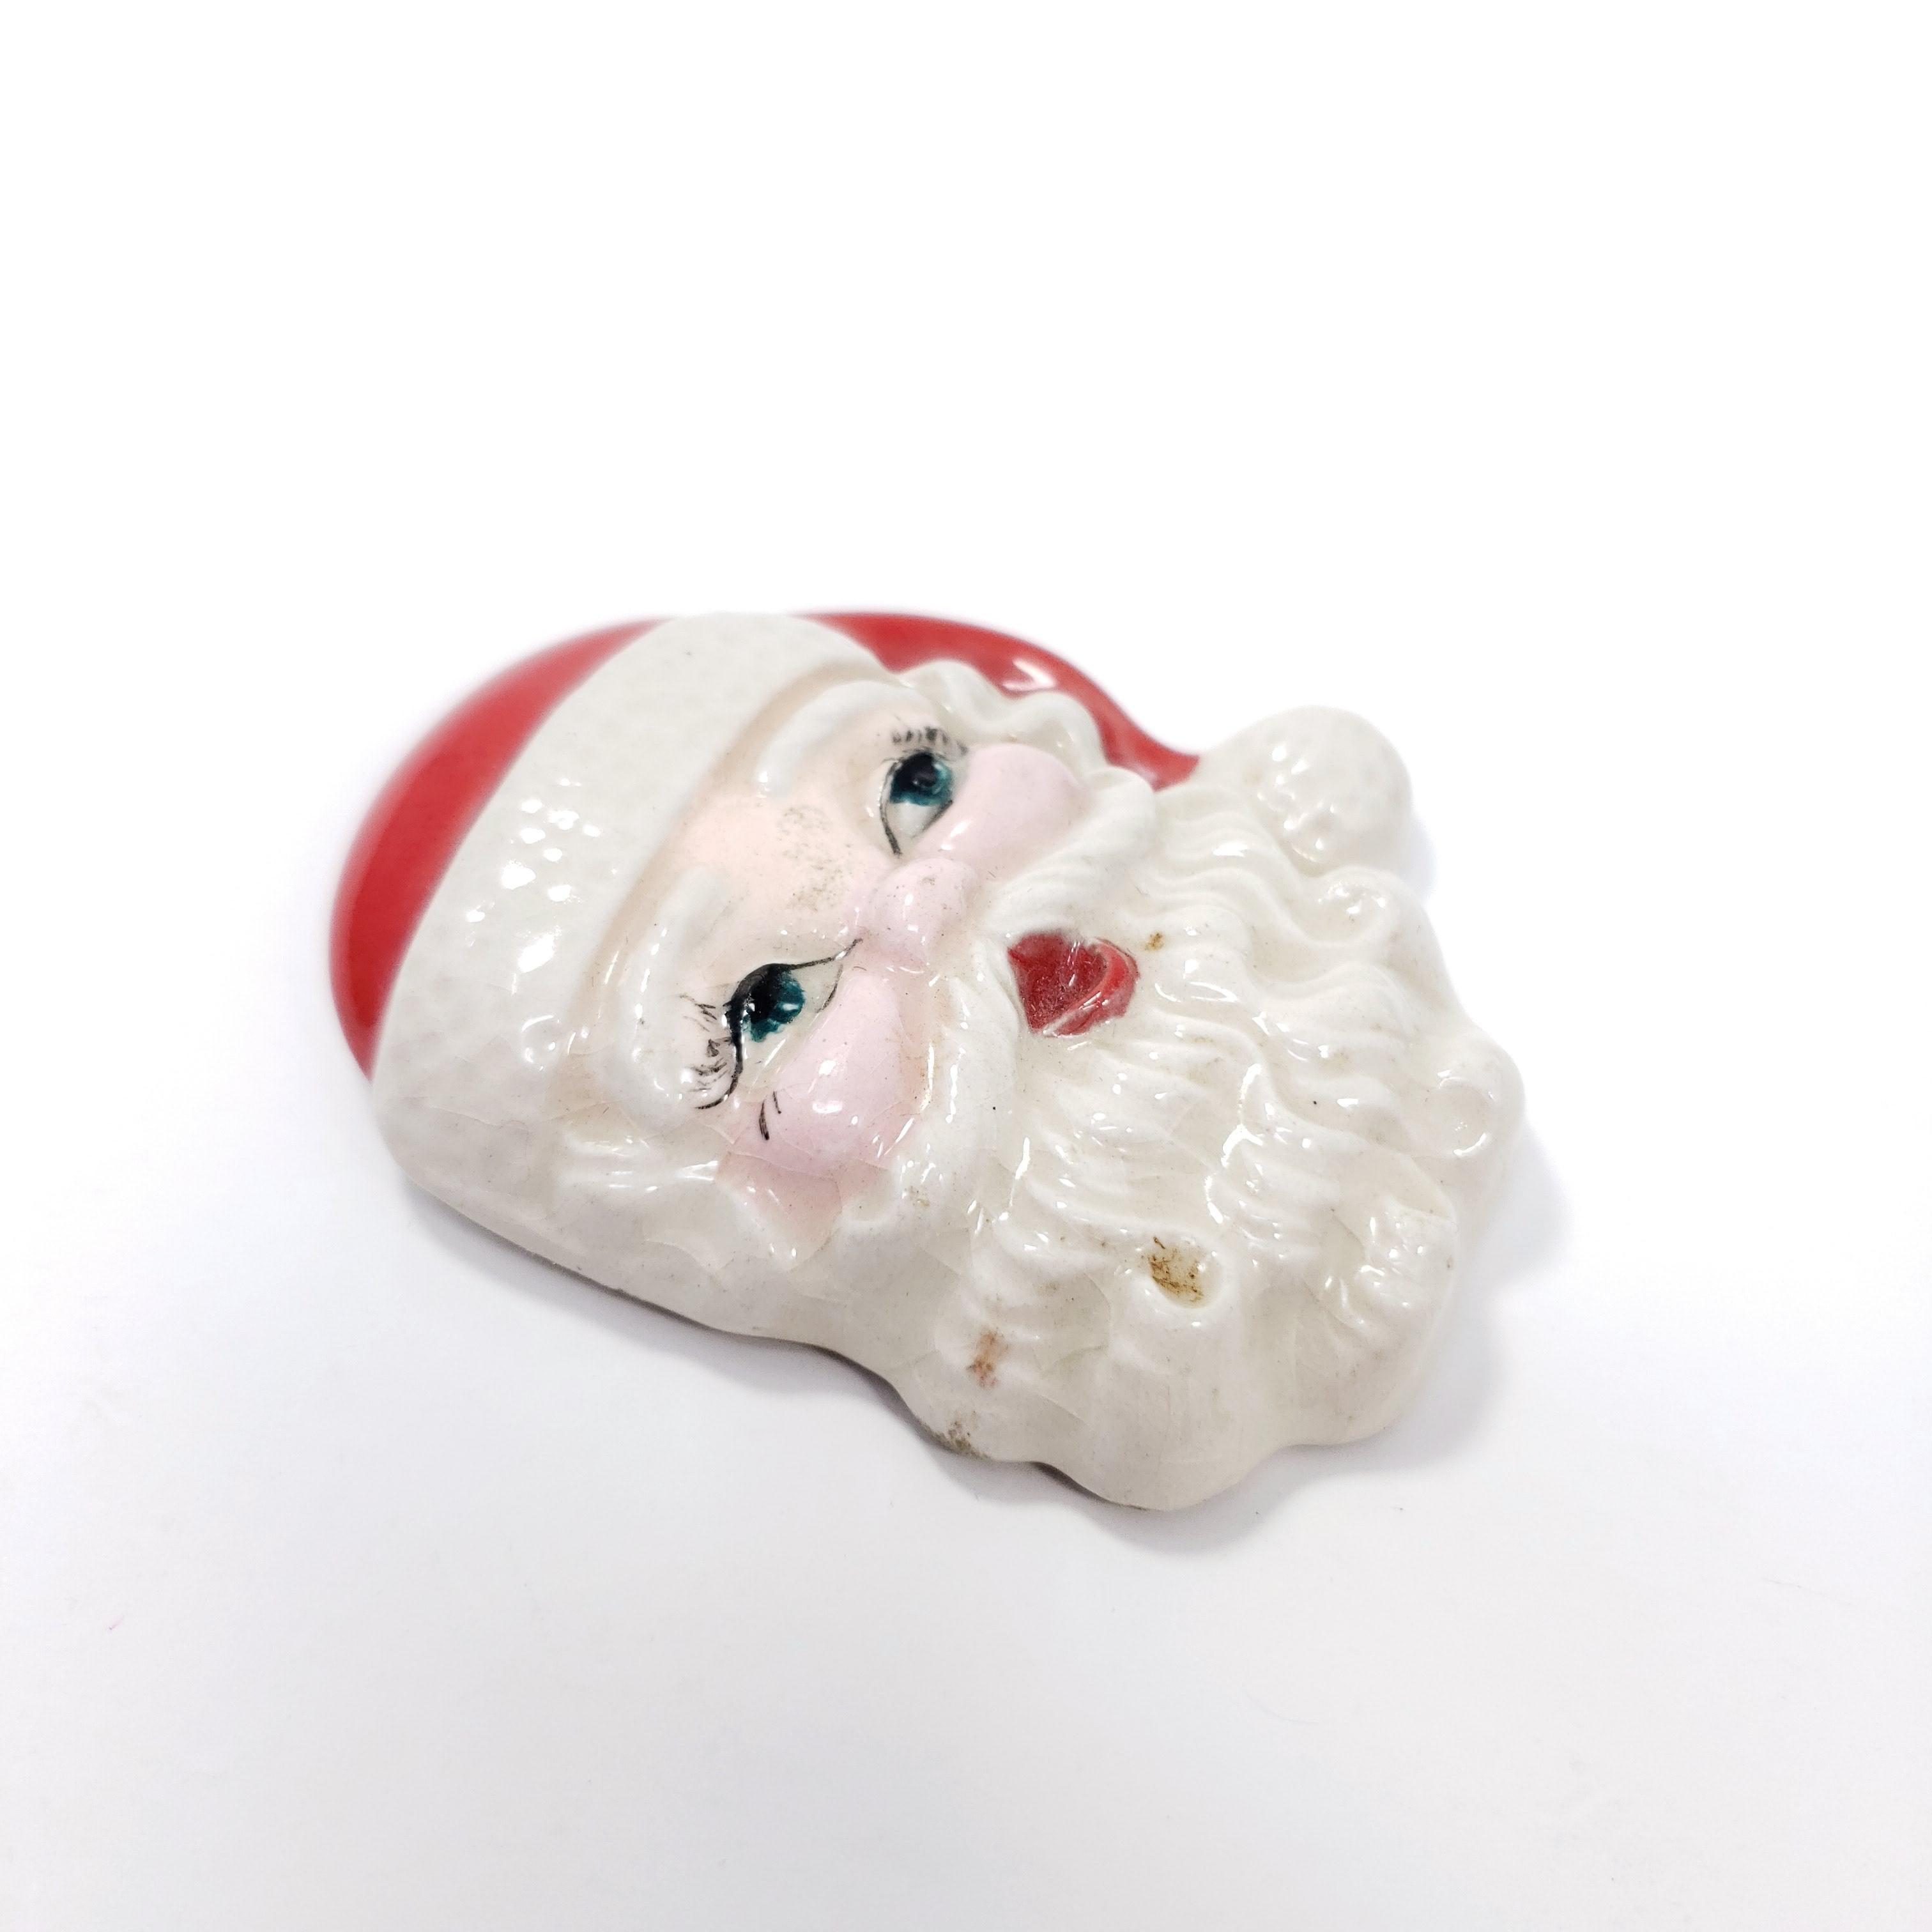 A festive holiday pin, featuring Santa Claus. The perfect touch of Christmas cheer!

Marks / hallmarks / etc: Molly McGuive